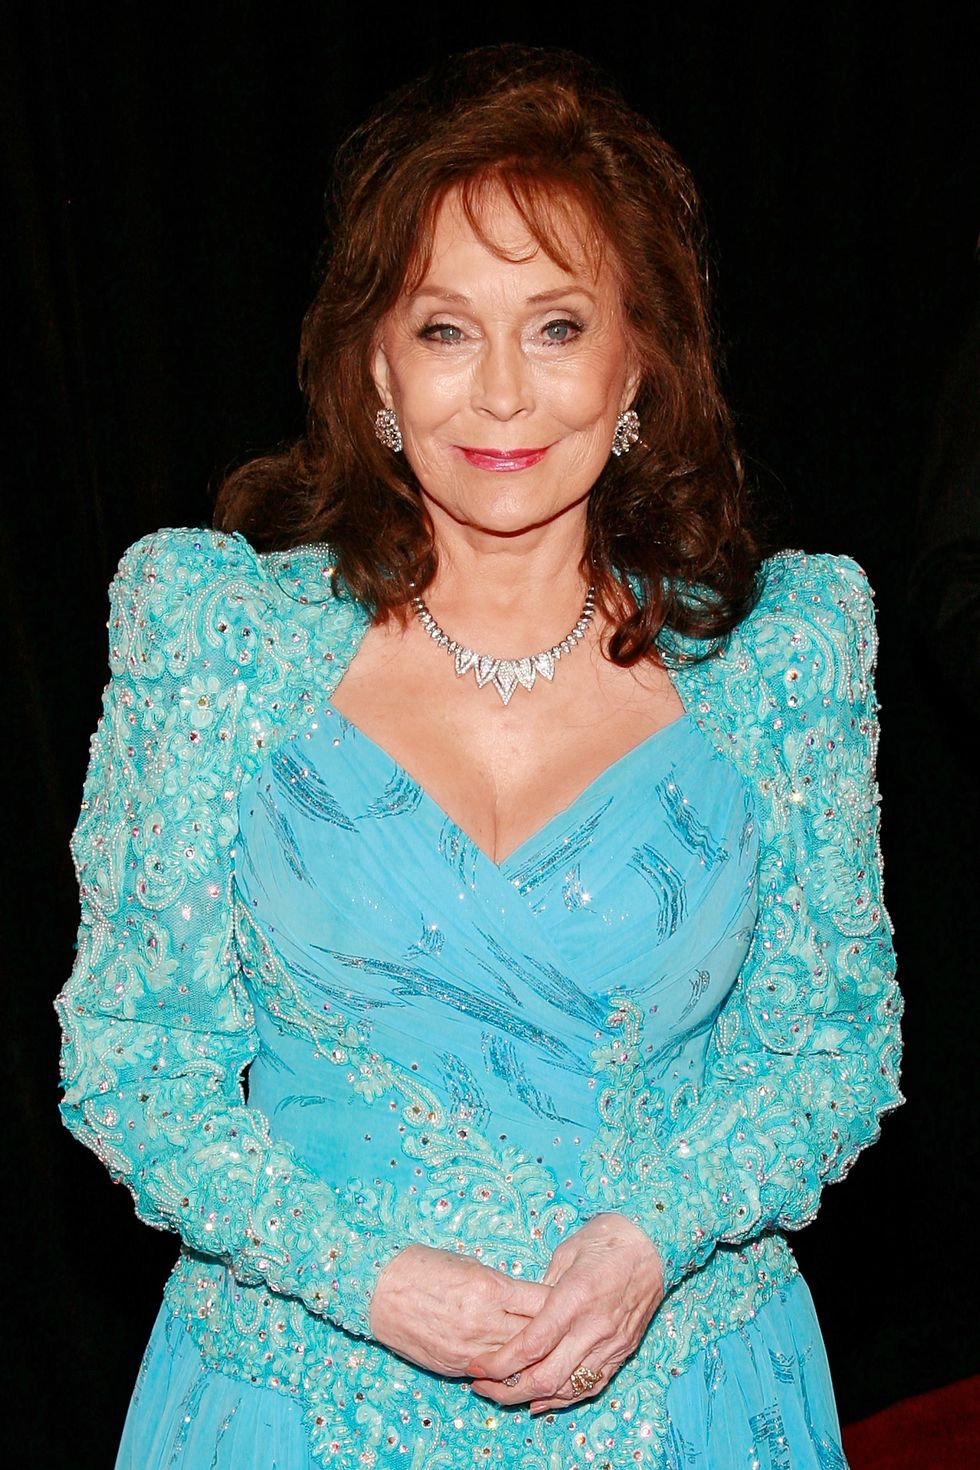 loretta lynn wearing a light blue dress and smiling for a photo